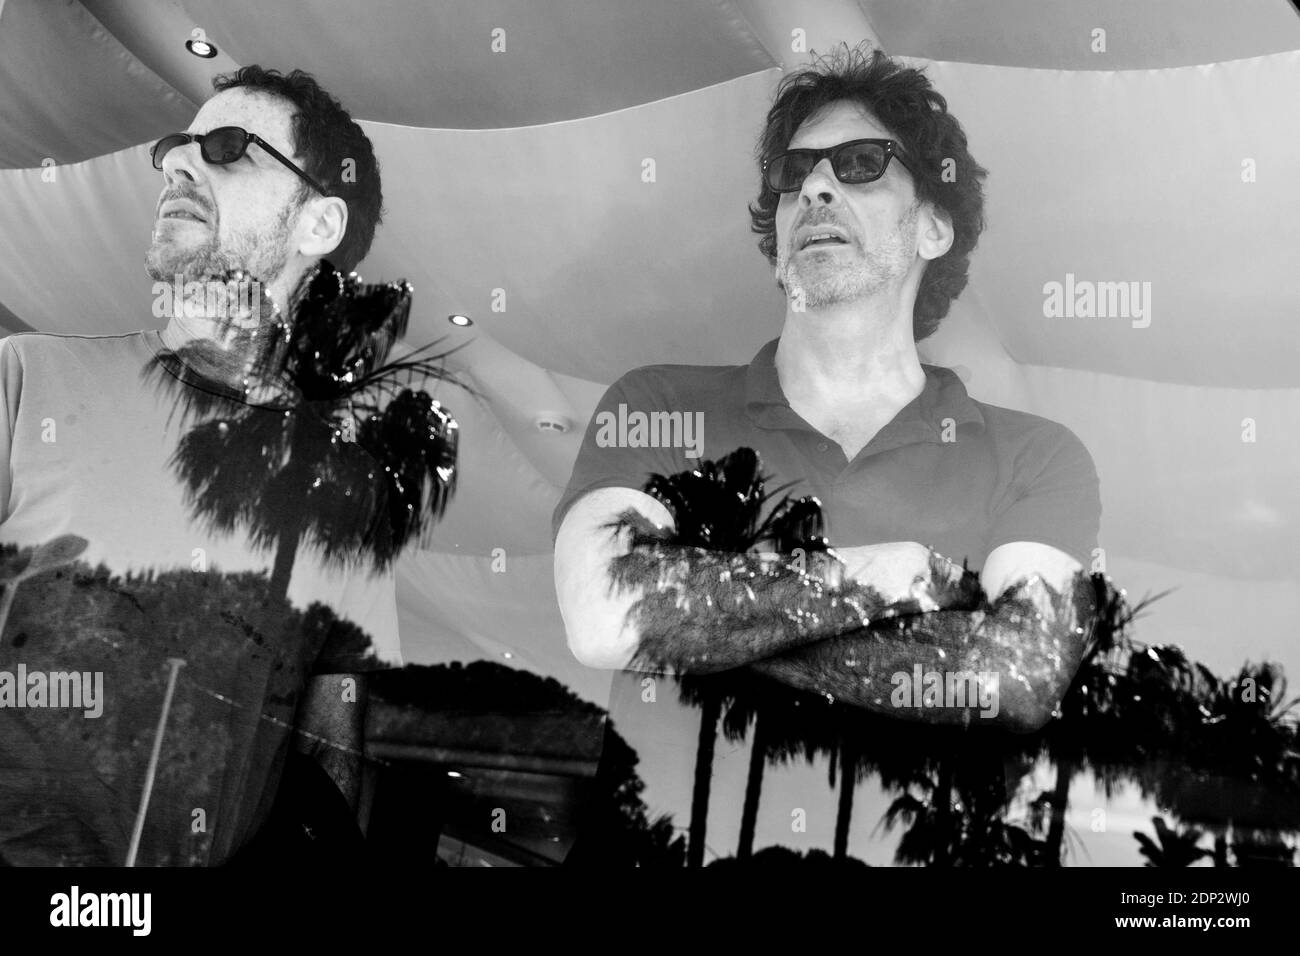 Presidents of the jury Joel and Ethan Coen pose for our photographer ahead of the opening of the 68th Cannes Film Festival at Le Martinez palace hotel in Cannes, France, May 12, 2015. Photo by Lionel Hahn/ABACAPRESS.COM Stock Photo